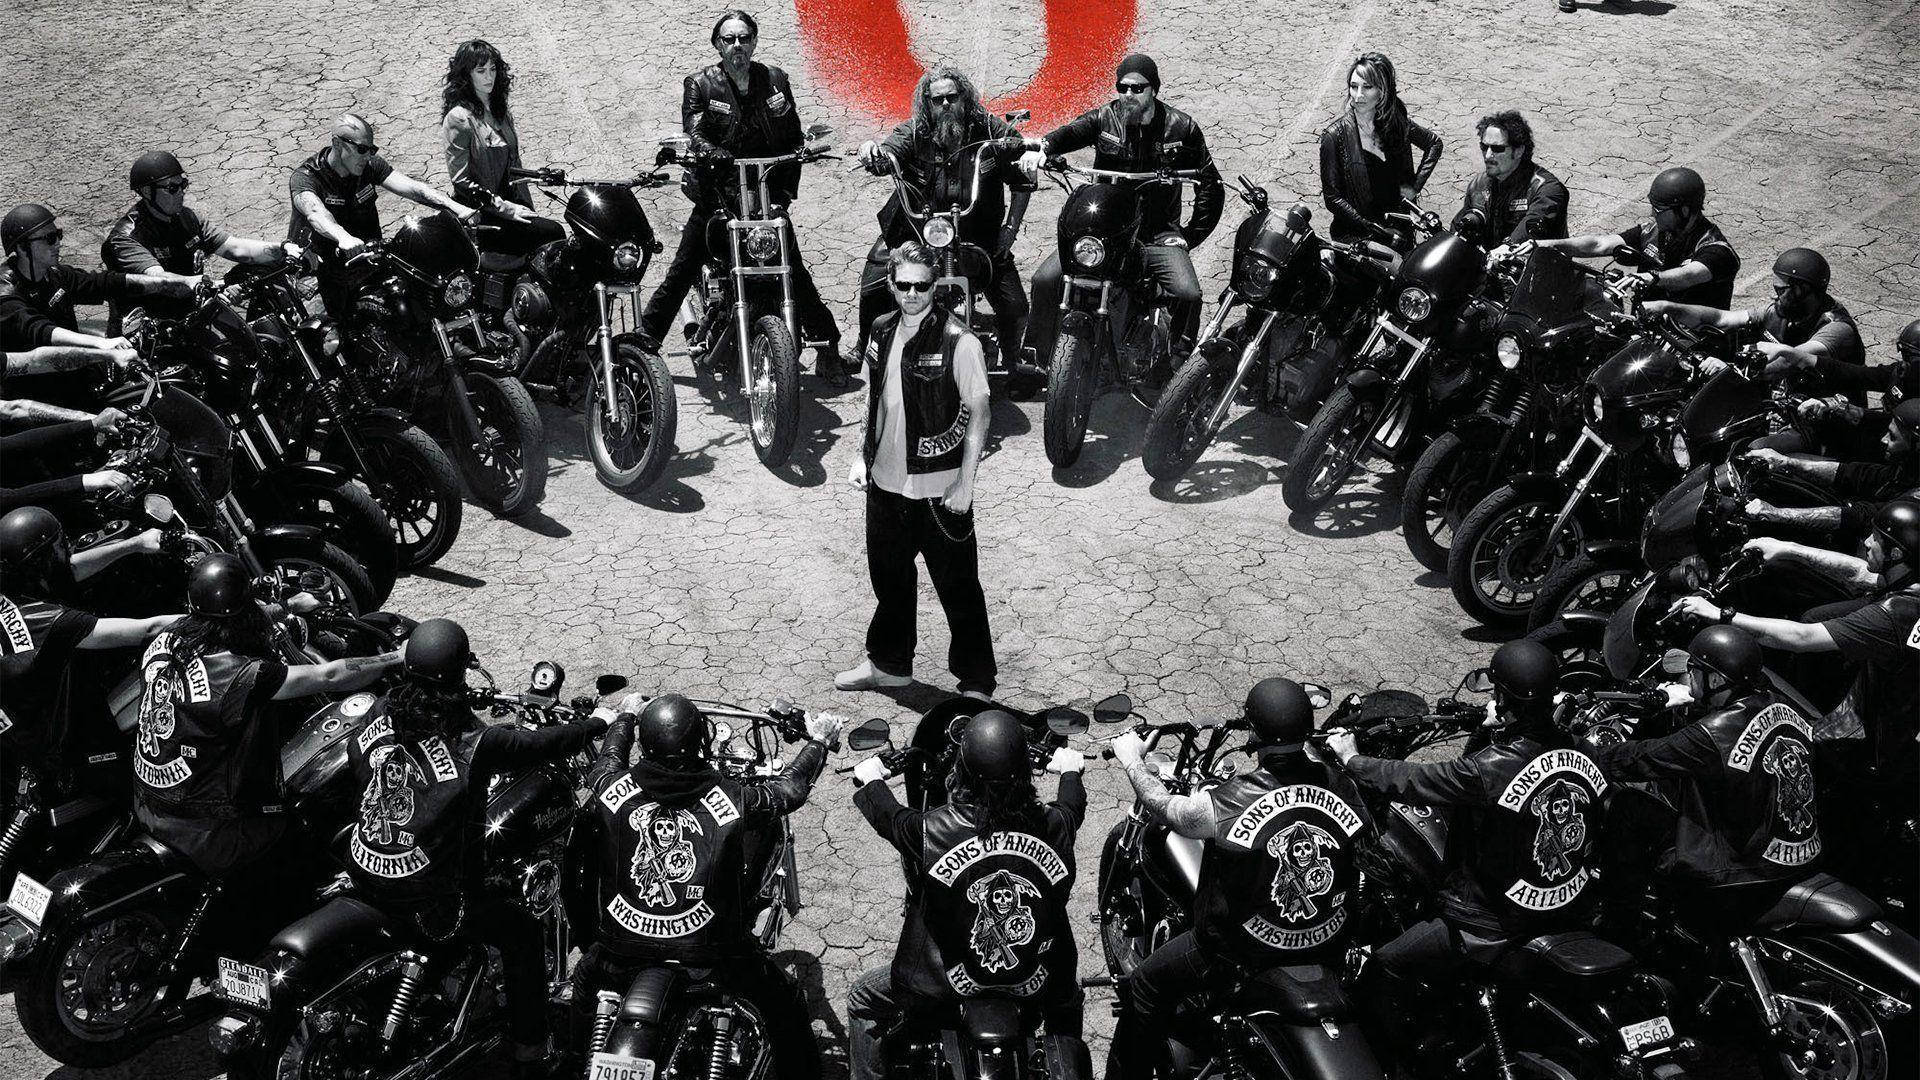 The Sons of Anarchy Ride Together Wallpaper